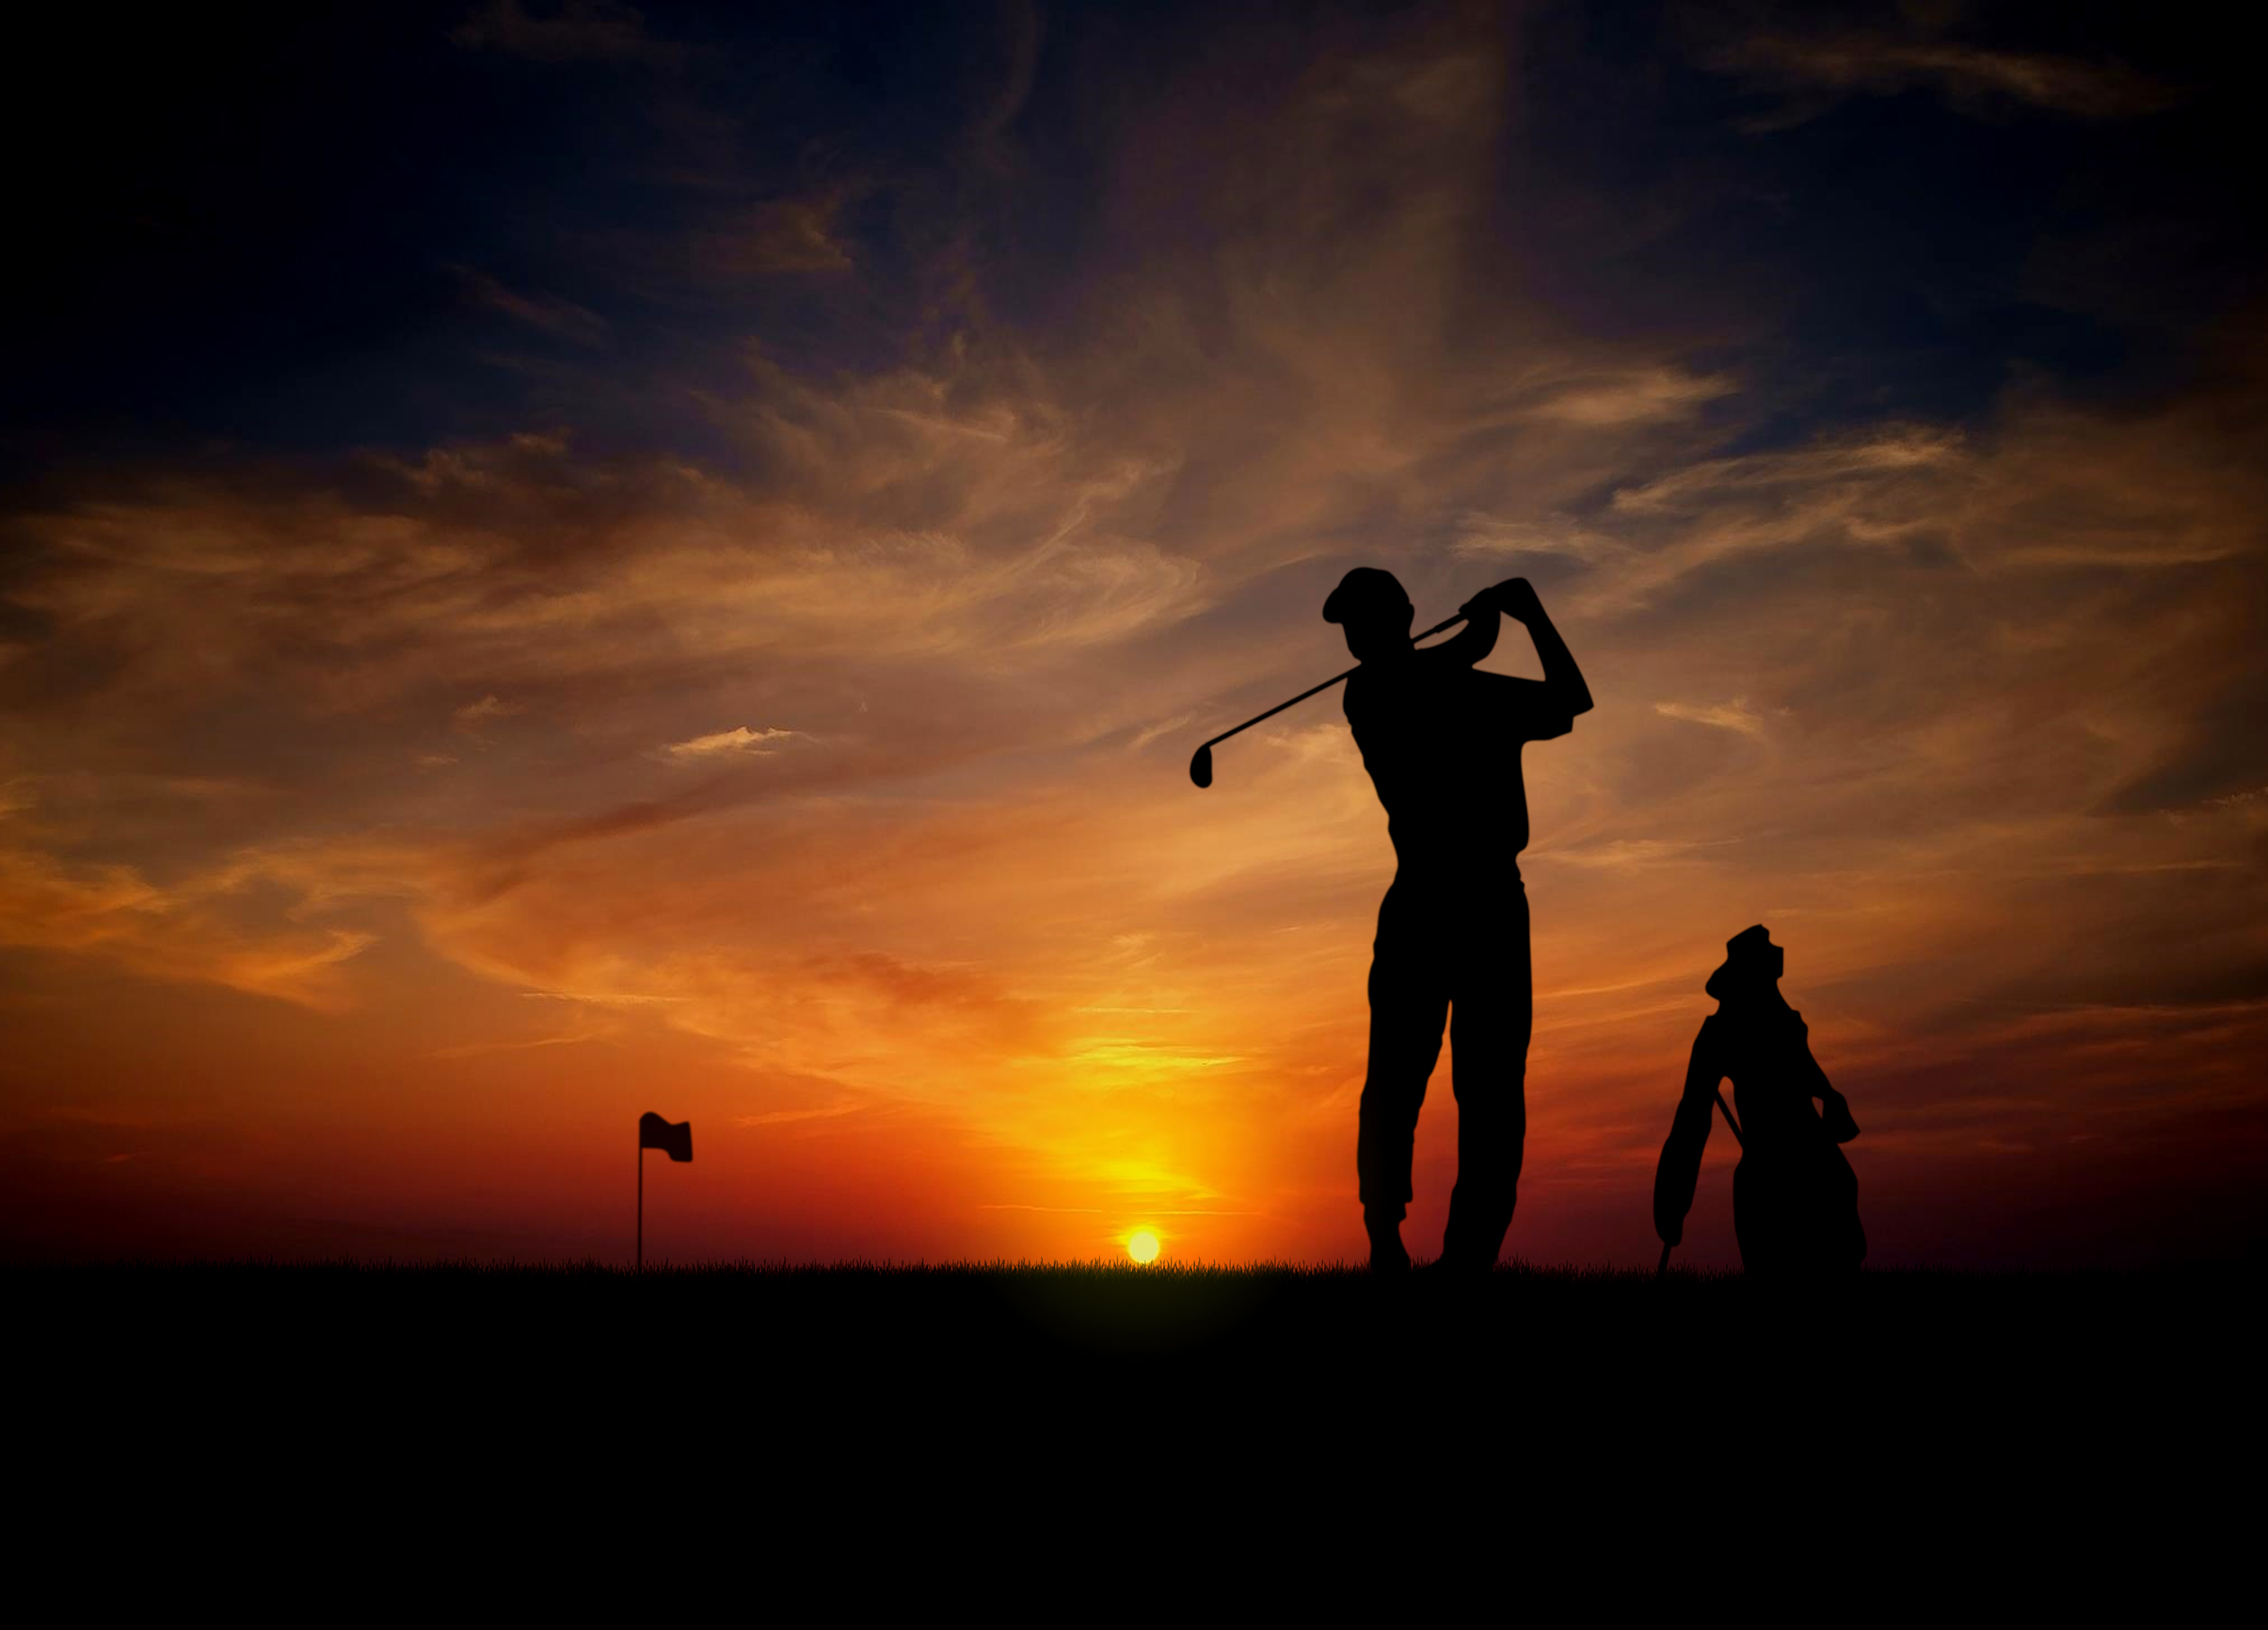 Golfer at sunset, Action, Playing, Relax, Recreational, HQ Photo